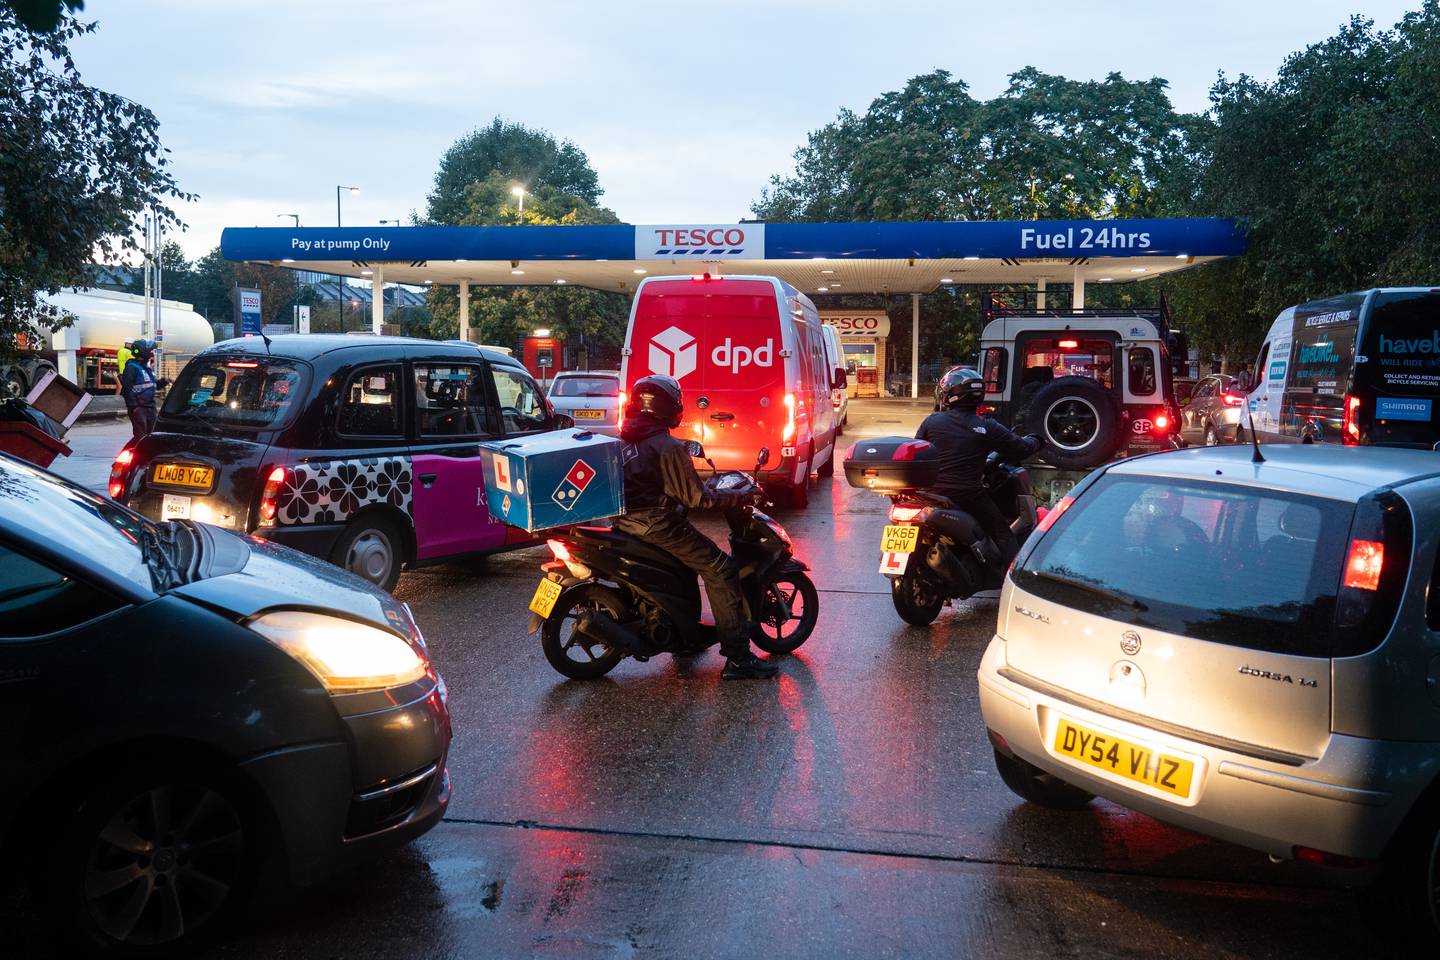 Drivers queue for fuel at a petrol station in south London as petrol stations across the UK continue to be affected by a shortage of HGV drivers. PA